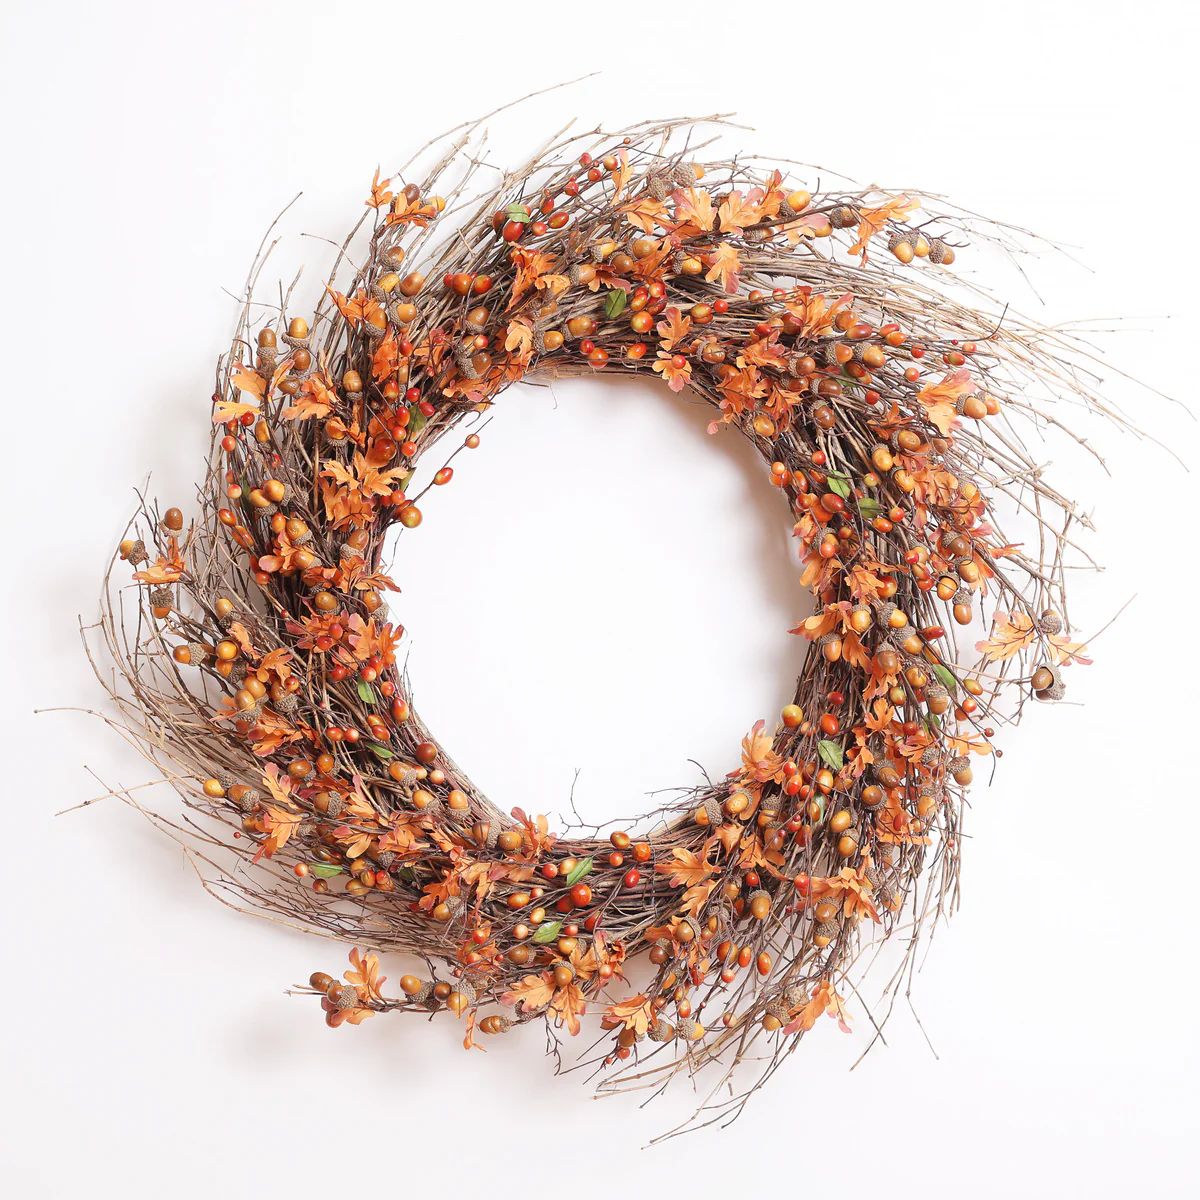 Acorn & Fall Leaves Front Door Twig Autumn Wreath - Available in Two Sizes | Darby Creek Trading